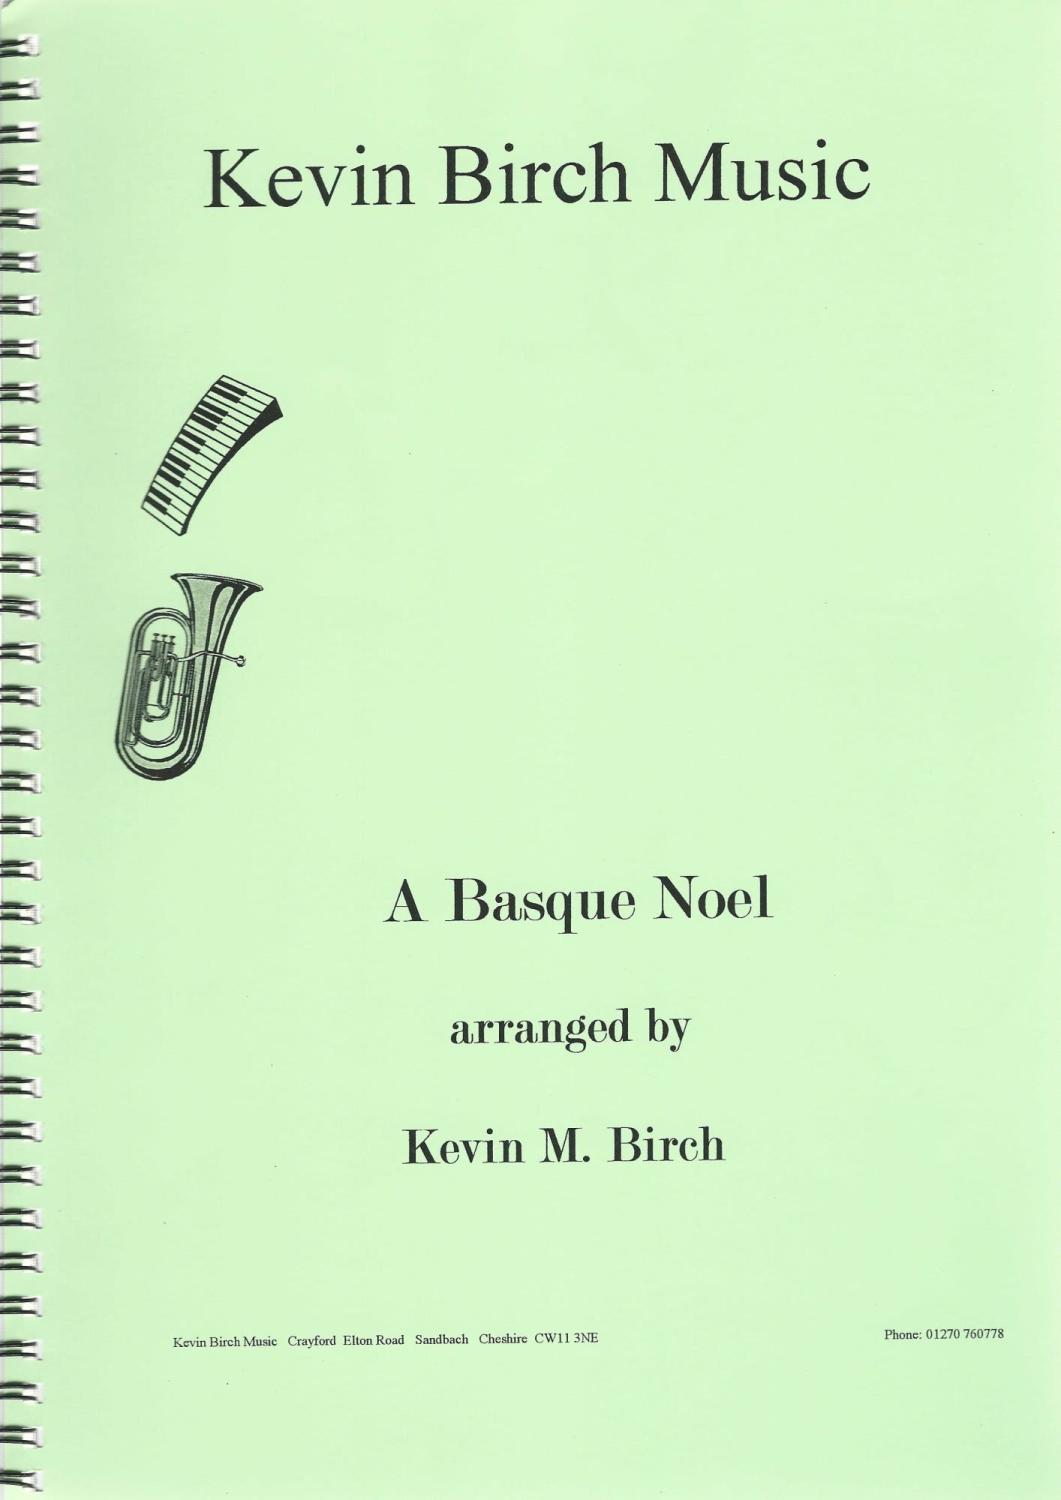 A Basque Noel for Brass Band - arr. Kevin M. Birch